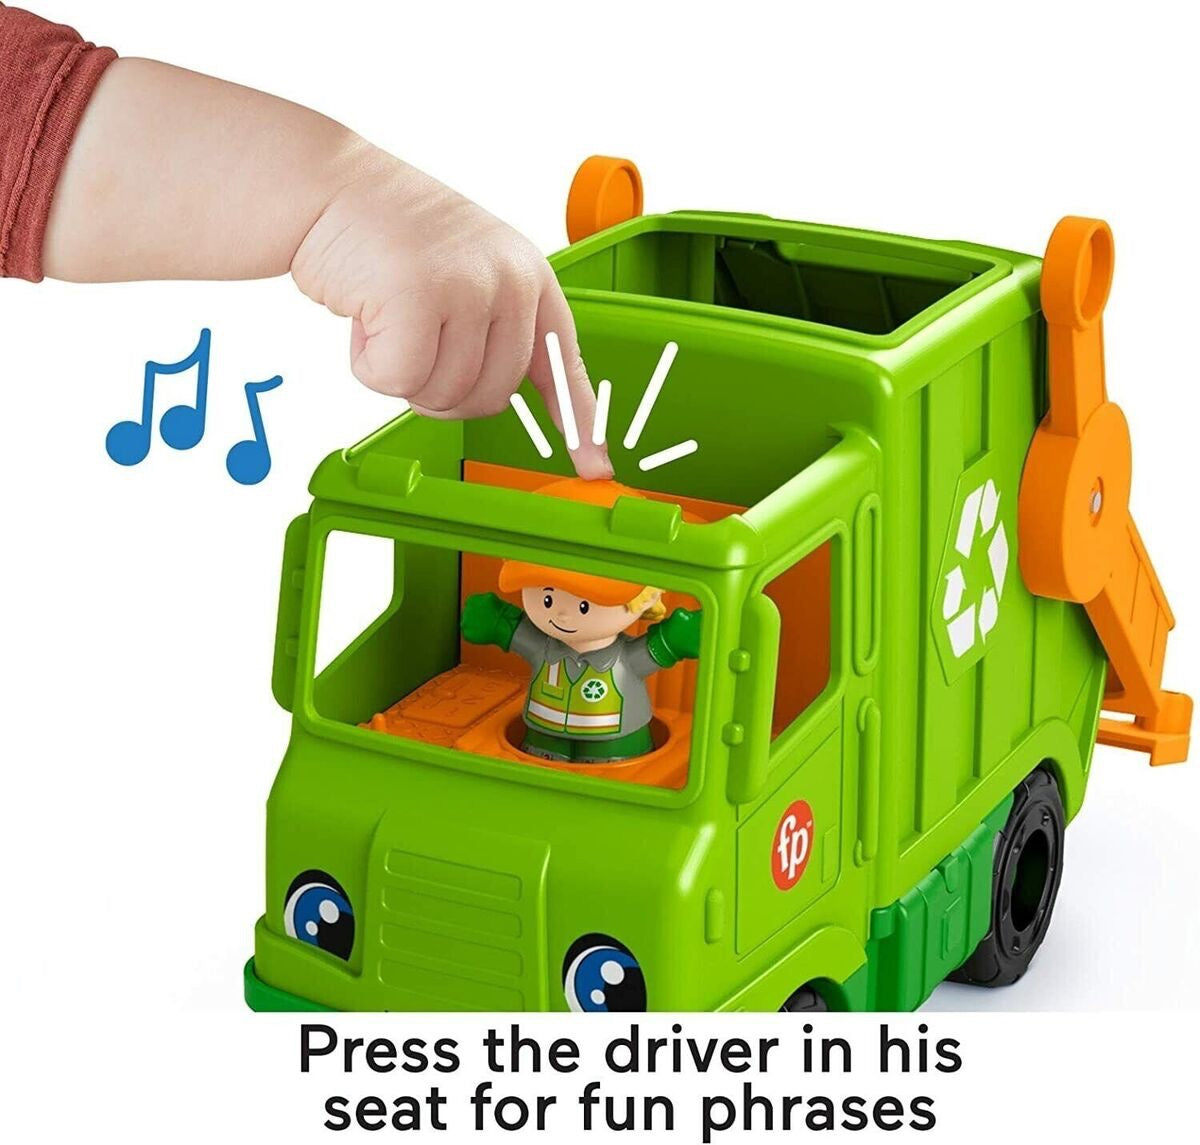 Fisher-Price - Little People Recycling Truck 18M+